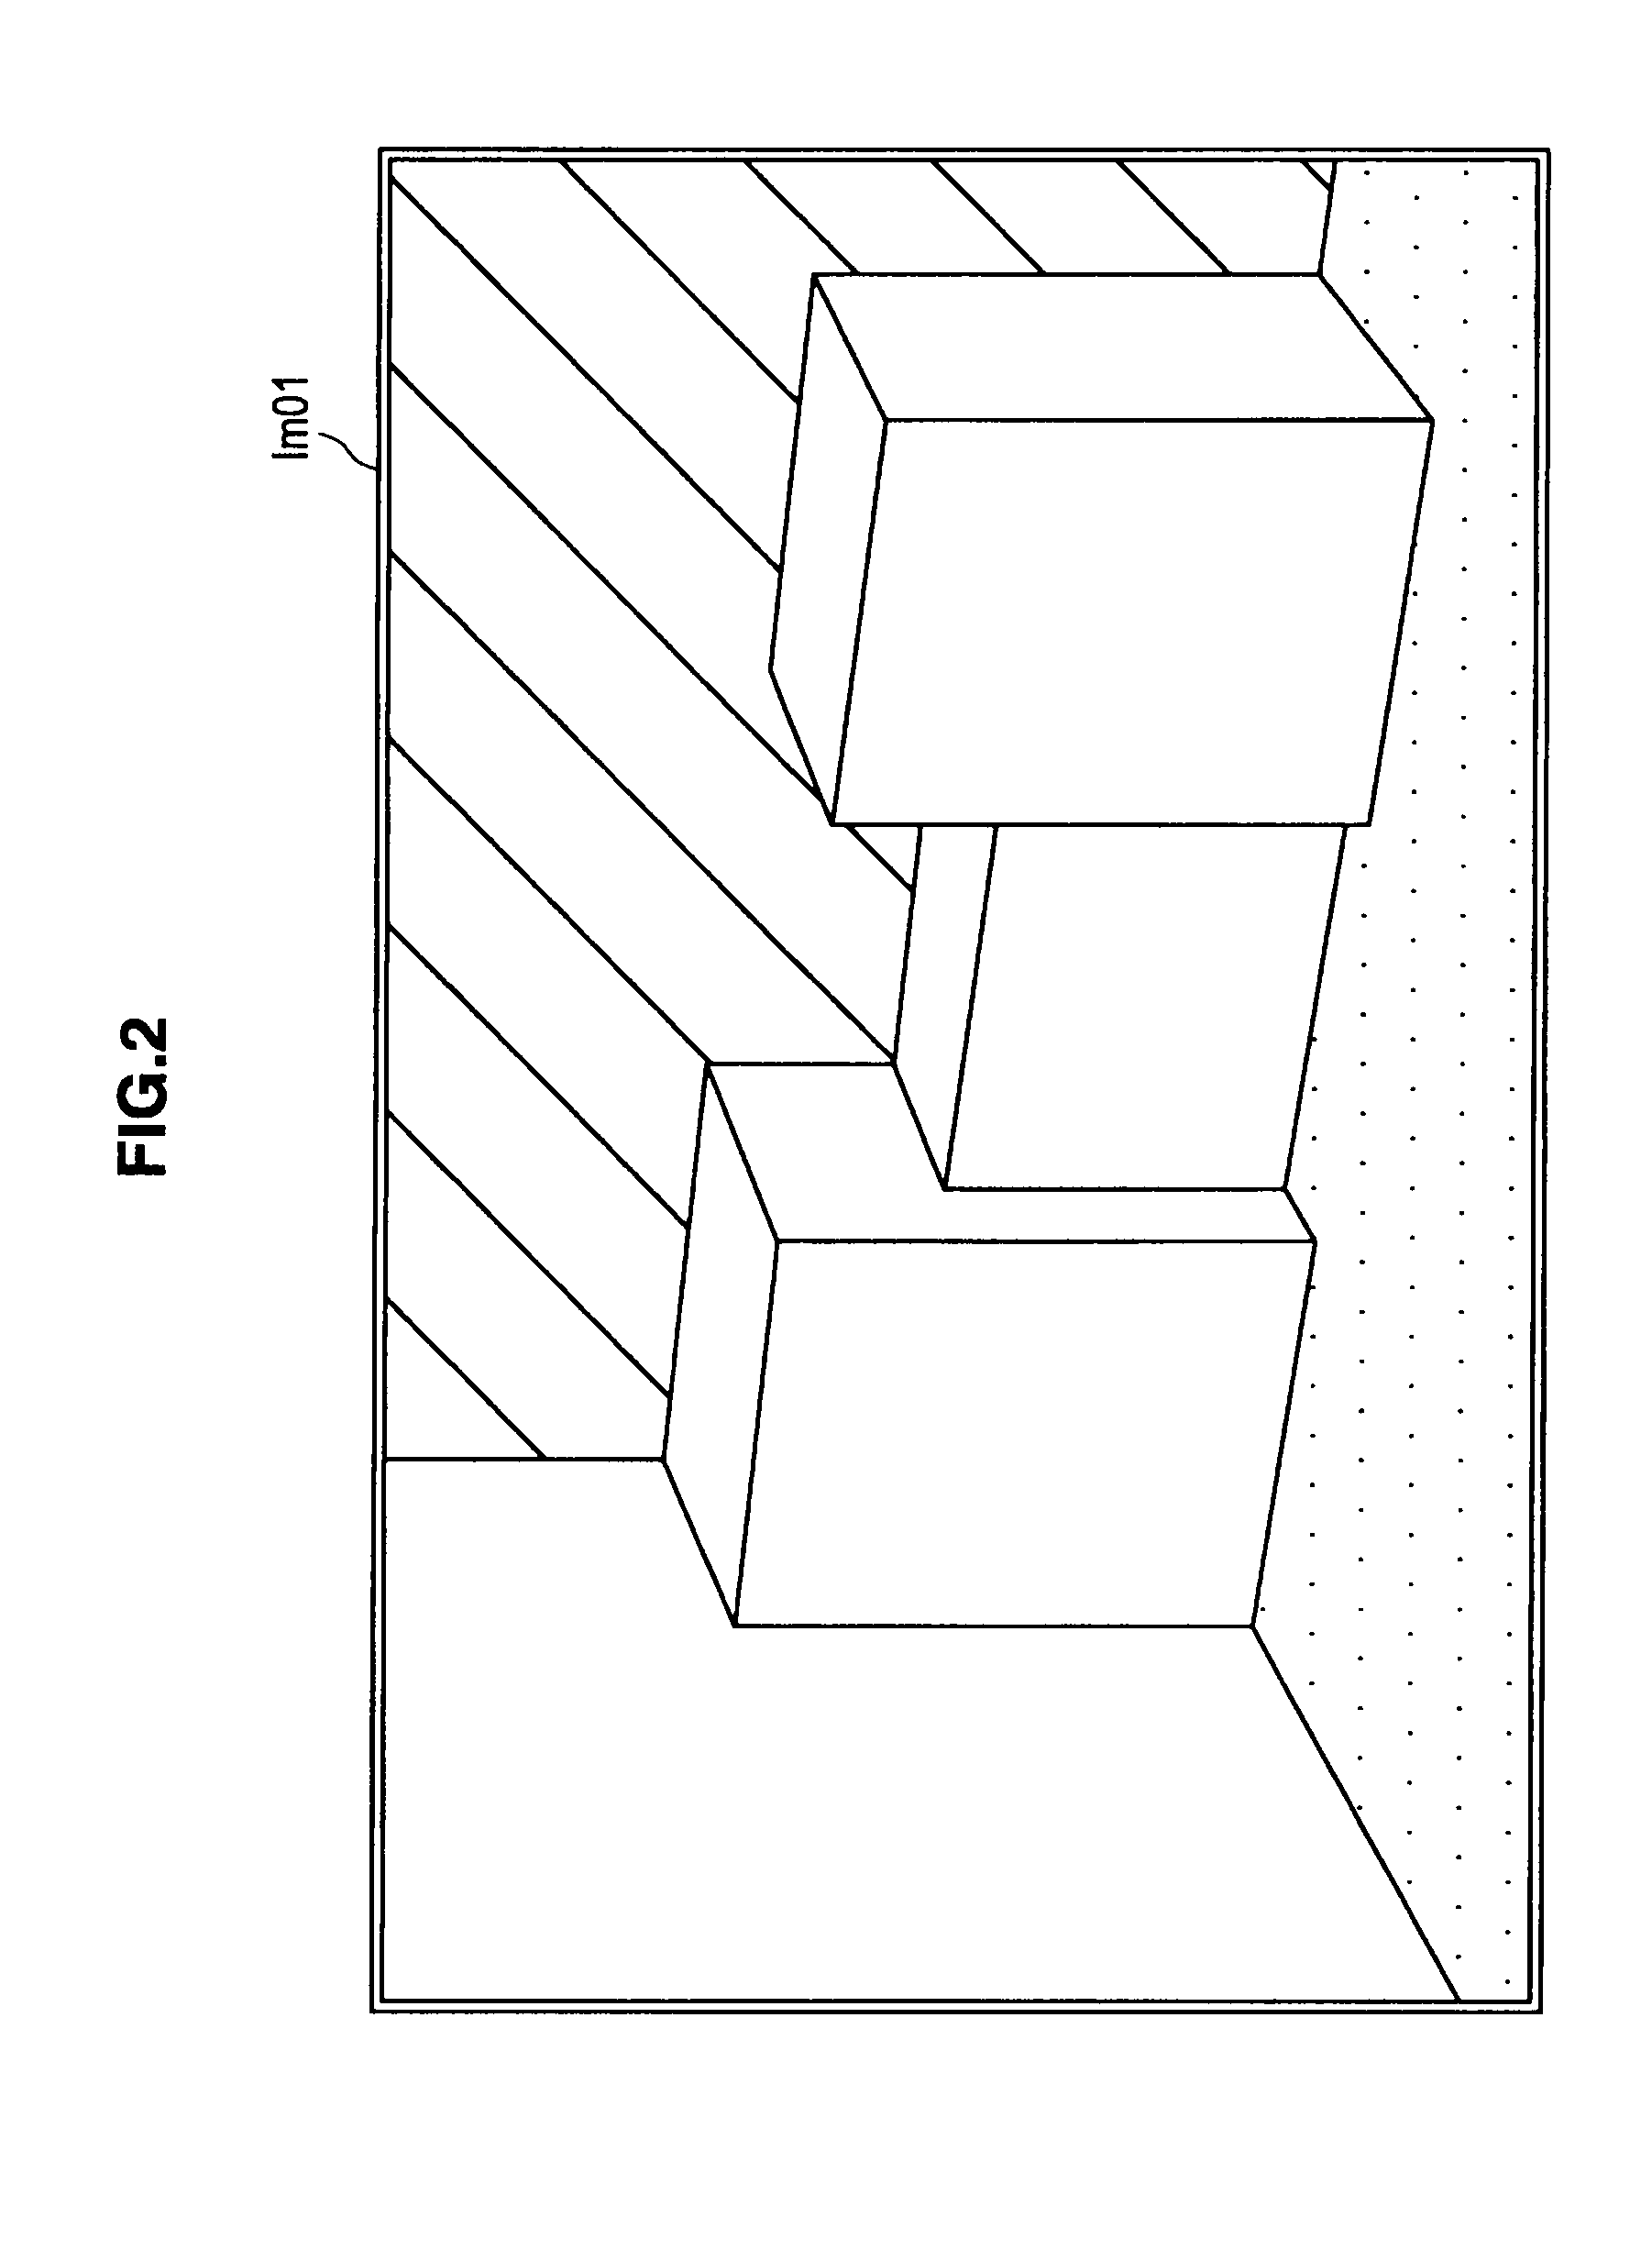 Image processing apparatus, image processing method and program for superimposition display